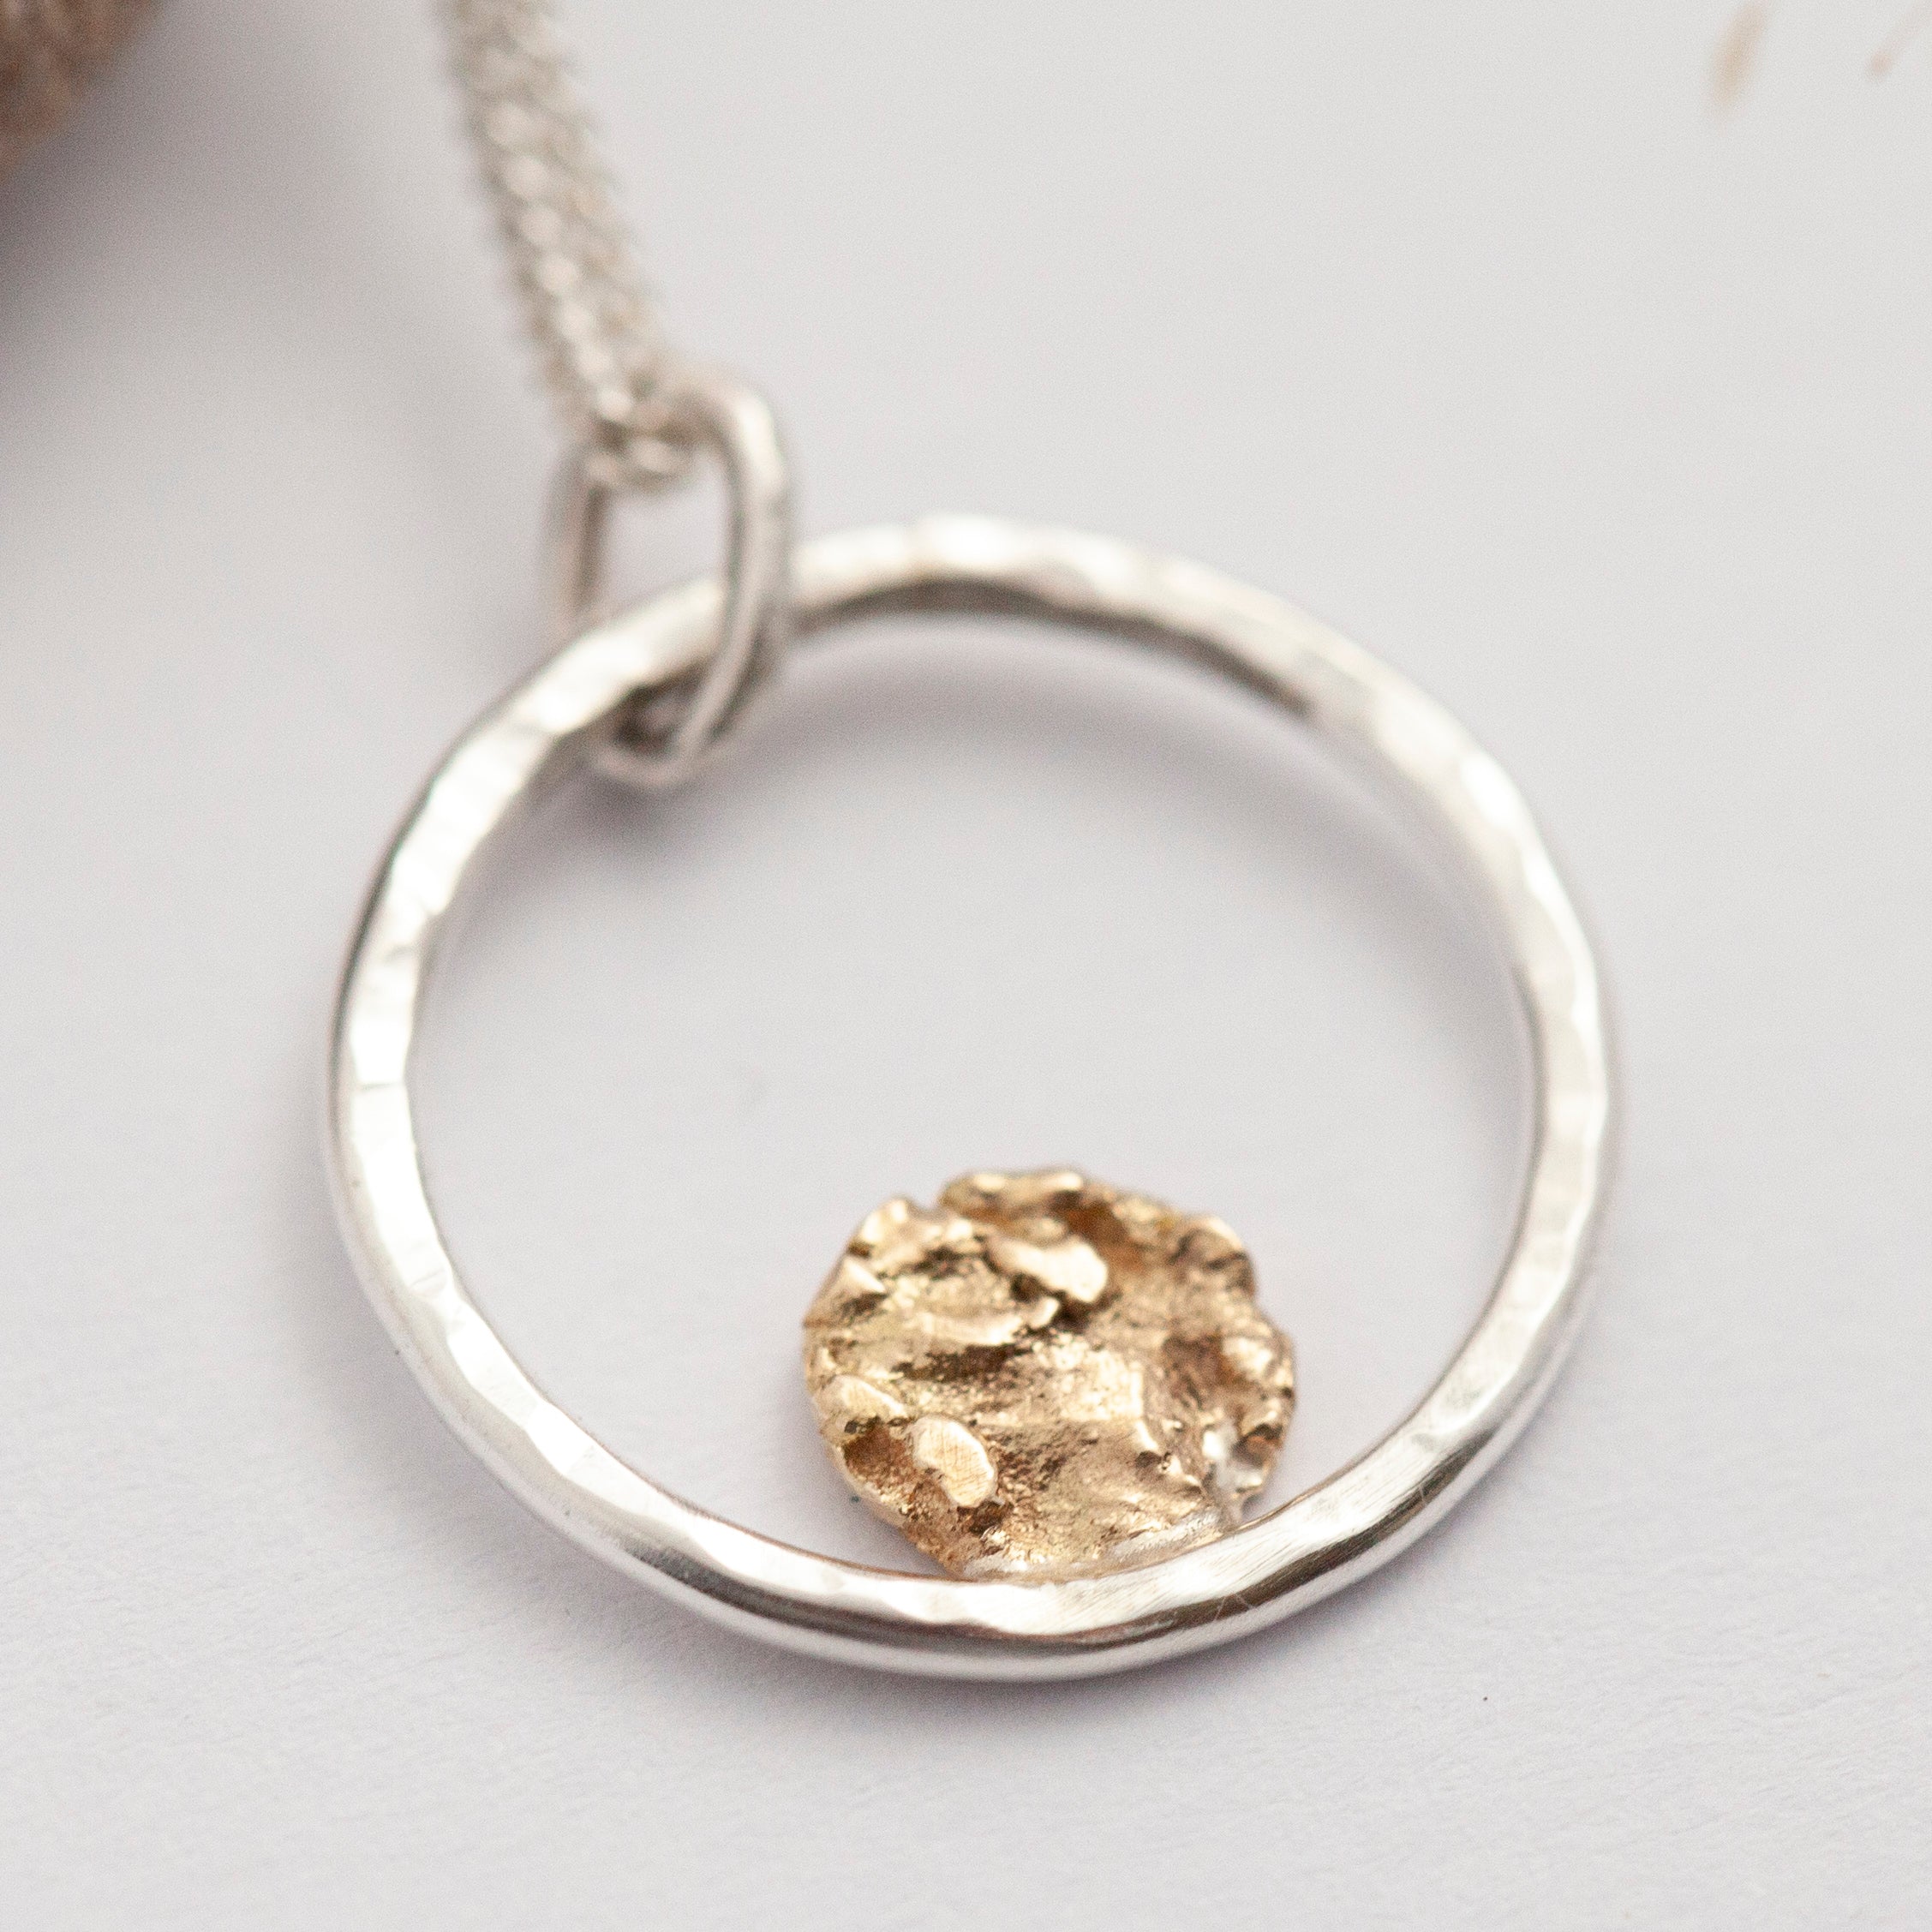 OOAK Moon halo pendant #3 • silver & solid 18k peach gold   (ready to ship)